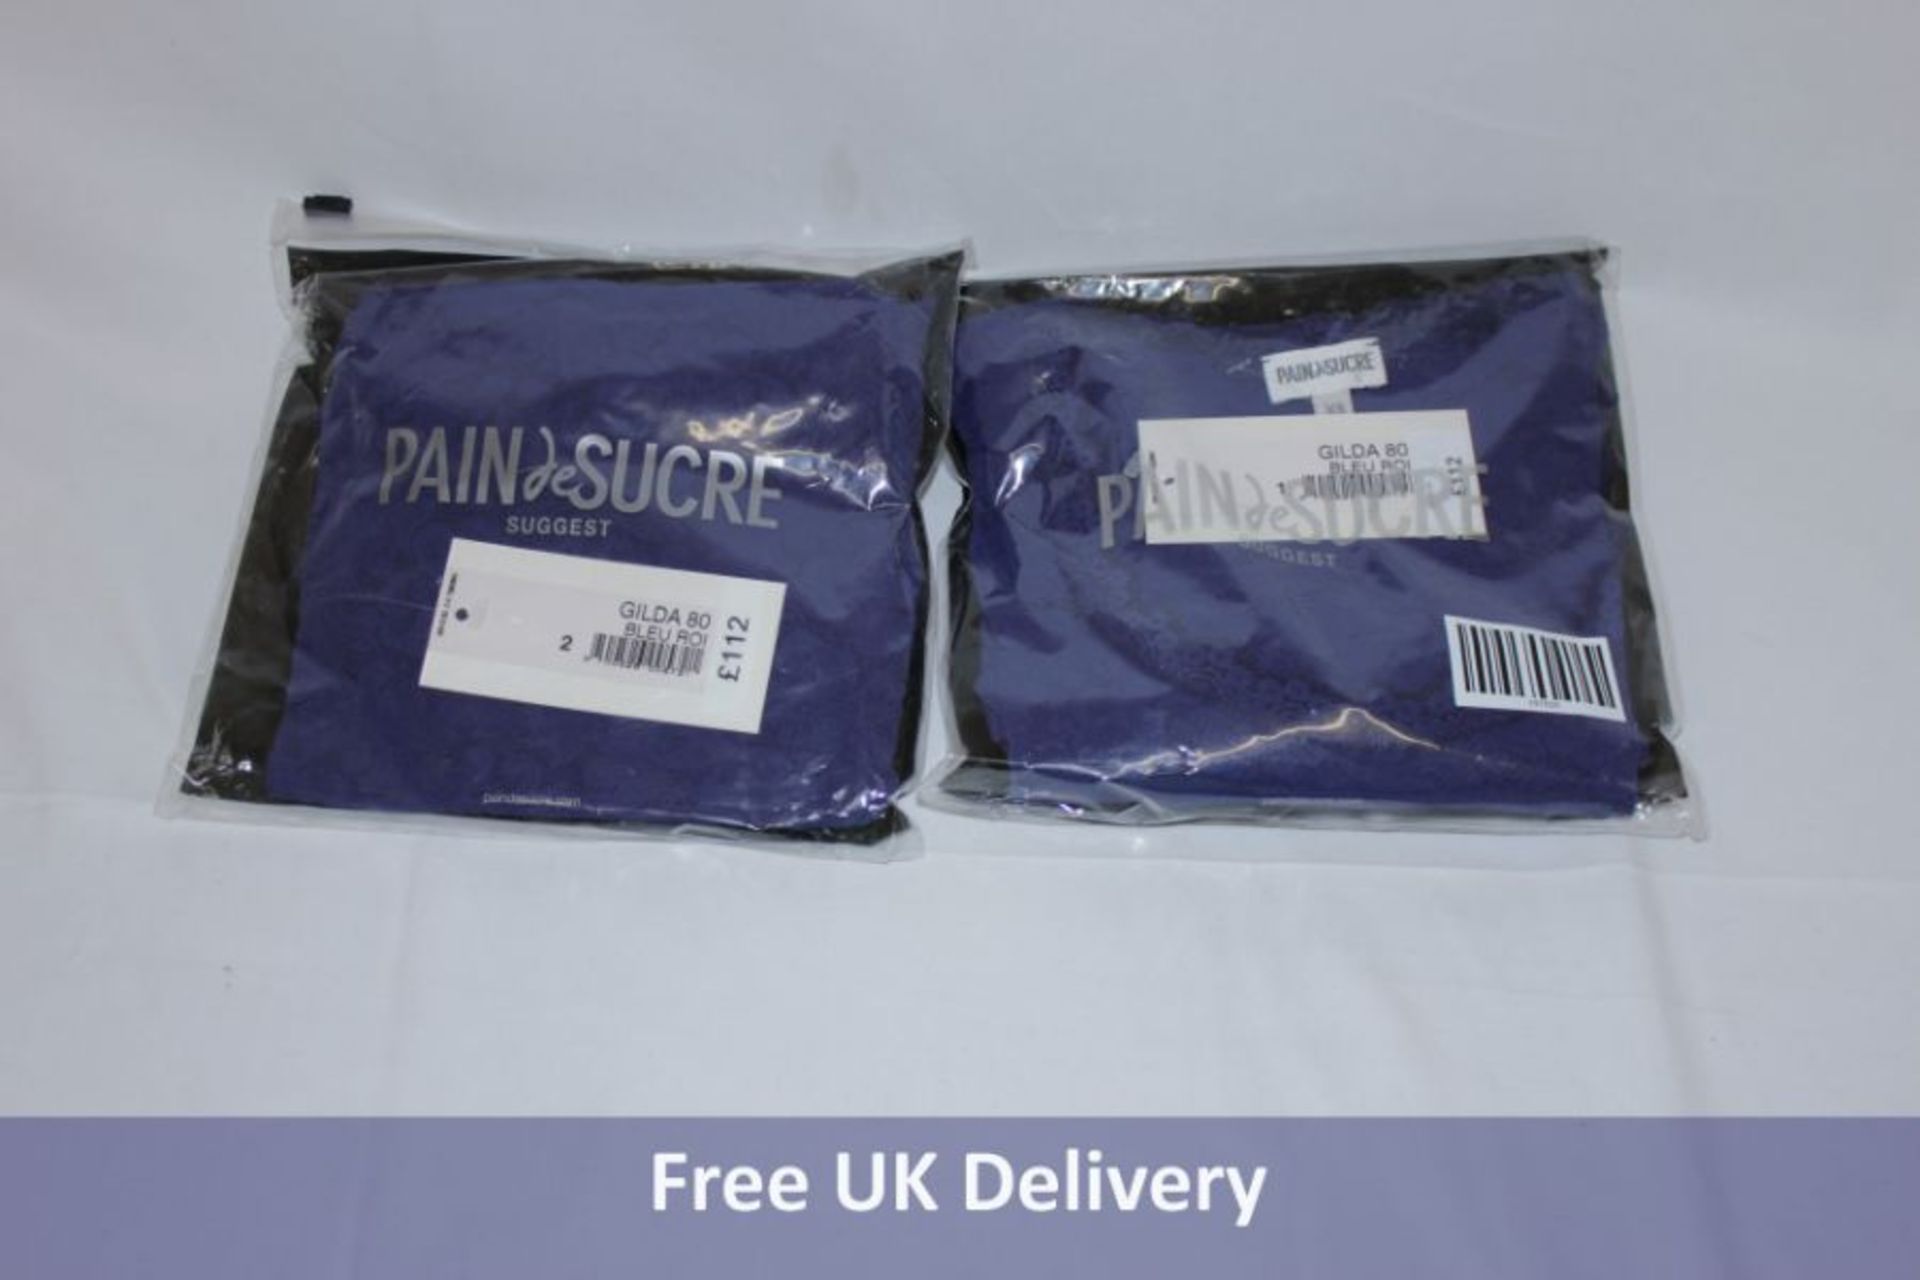 Two Pain De Sucre Gilda 80 Bleu Long Sleeved Tops, Dark Blue to include 1x Size XS and 1x Size S